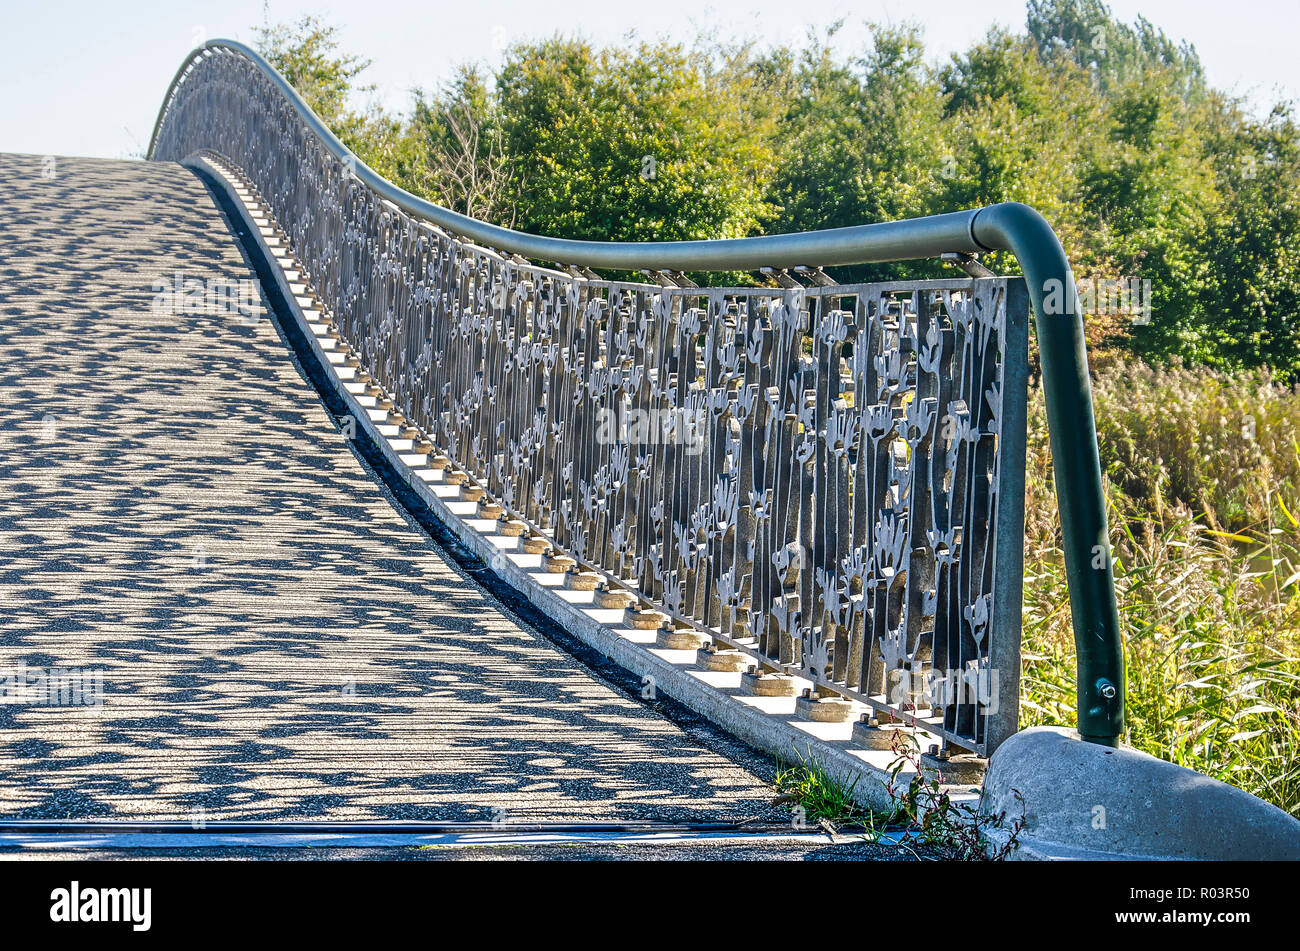 Utrecht, The Netherlands, September 27, 2018: detail of the arch bridge across Lelievijver (Lily Pond) in Maximapark, with the steel railing casting s Stock Photo